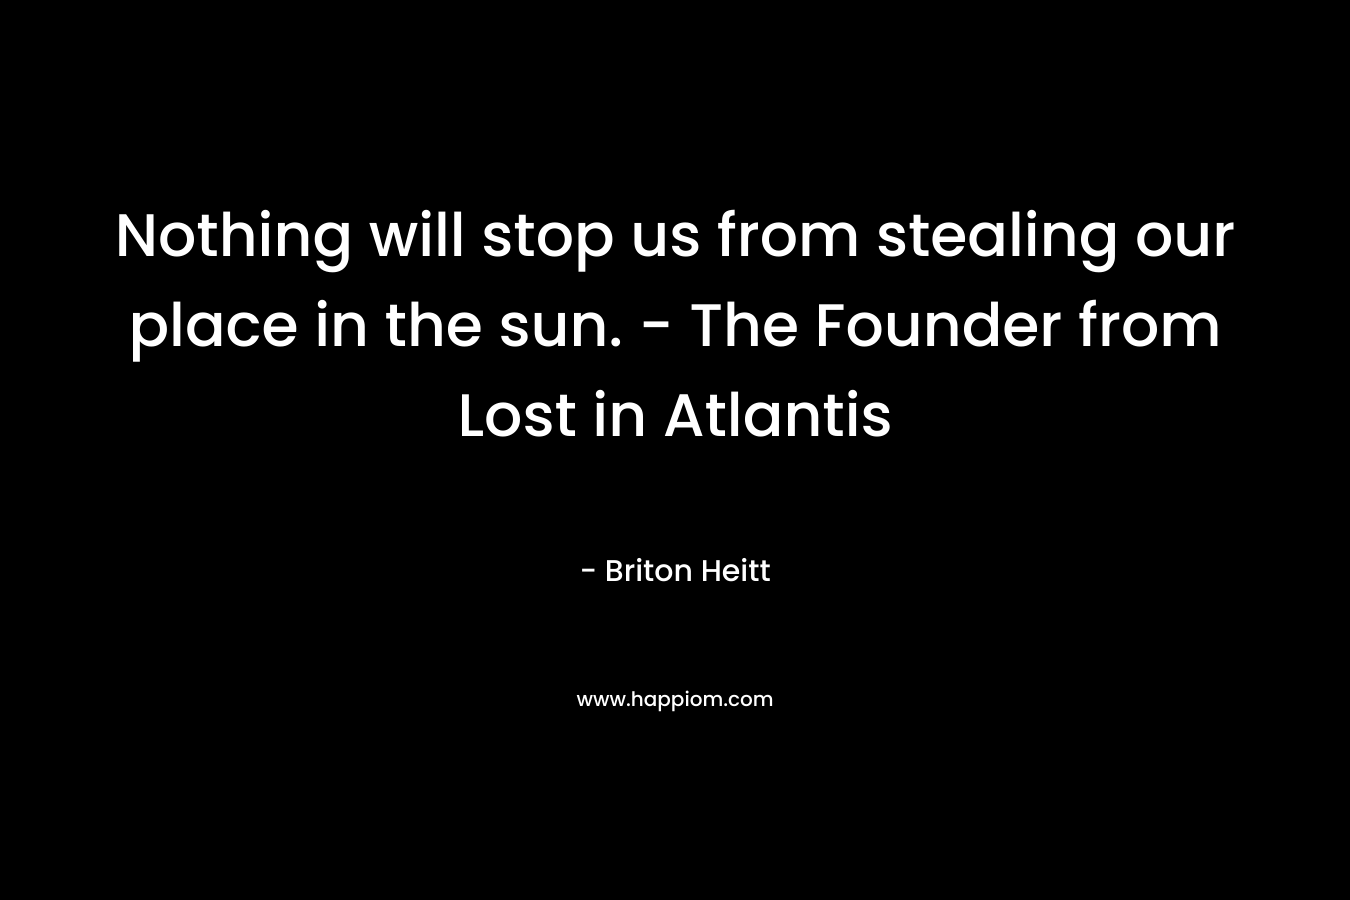 Nothing will stop us from stealing our place in the sun. - The Founder from Lost in Atlantis